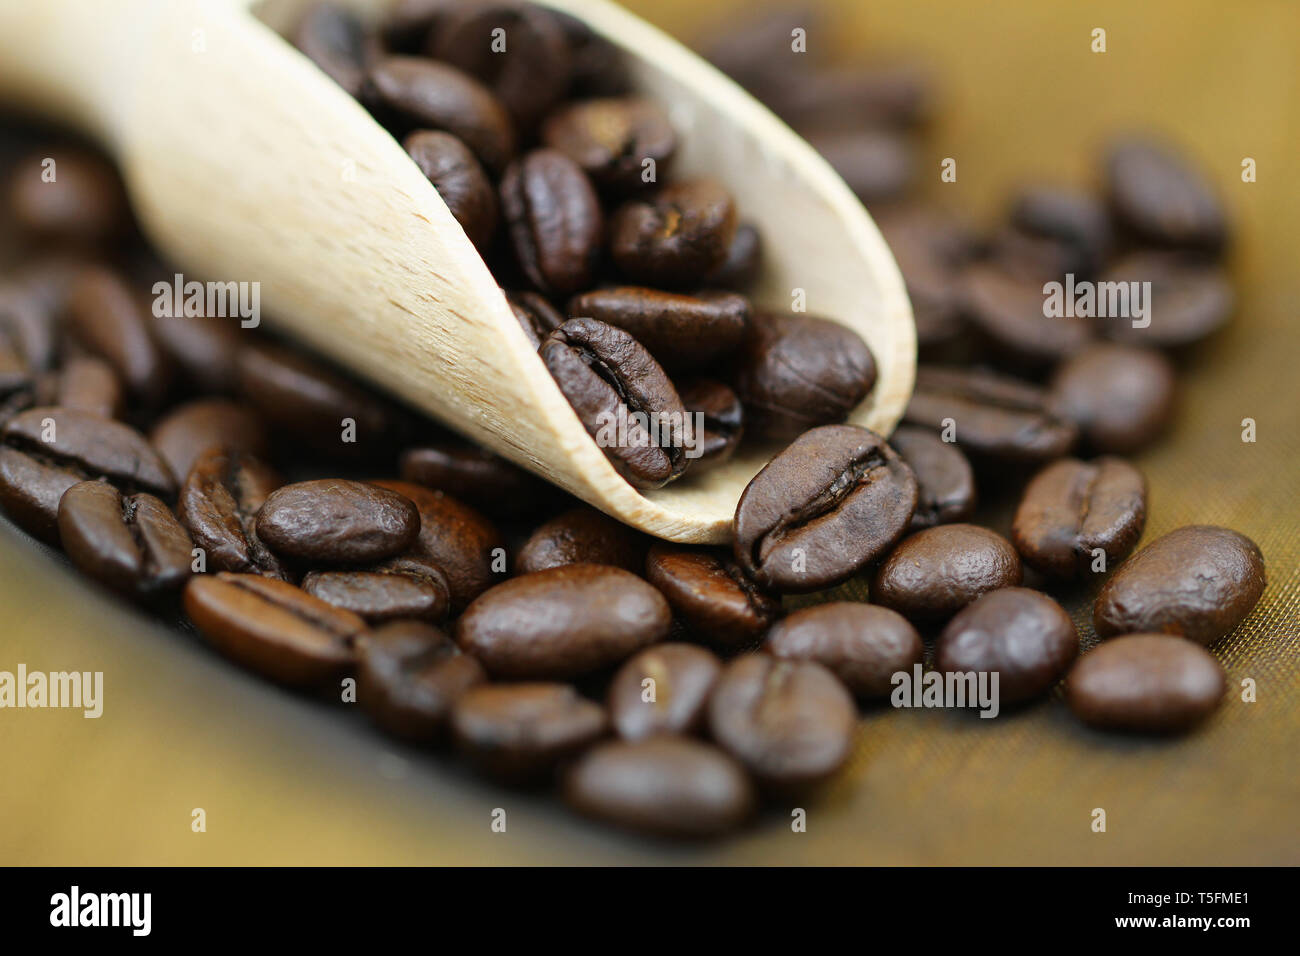 Closeup of roasted coffee beans on wooden scoop Stock Photo